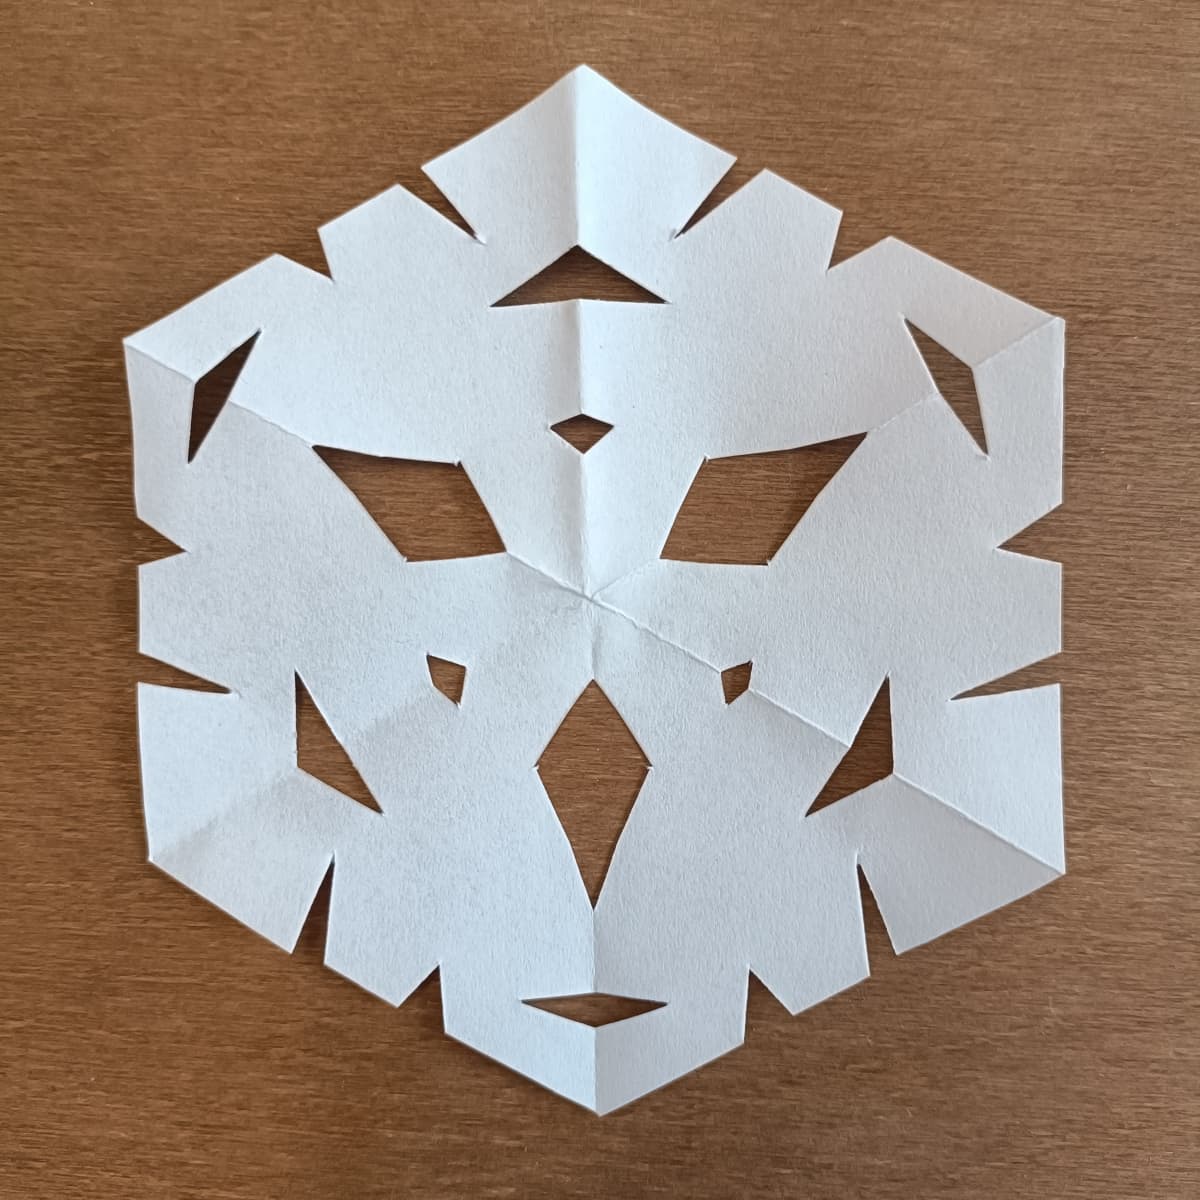 10 Homemade Snowflake Decorations or Snowflake Crafts That Go